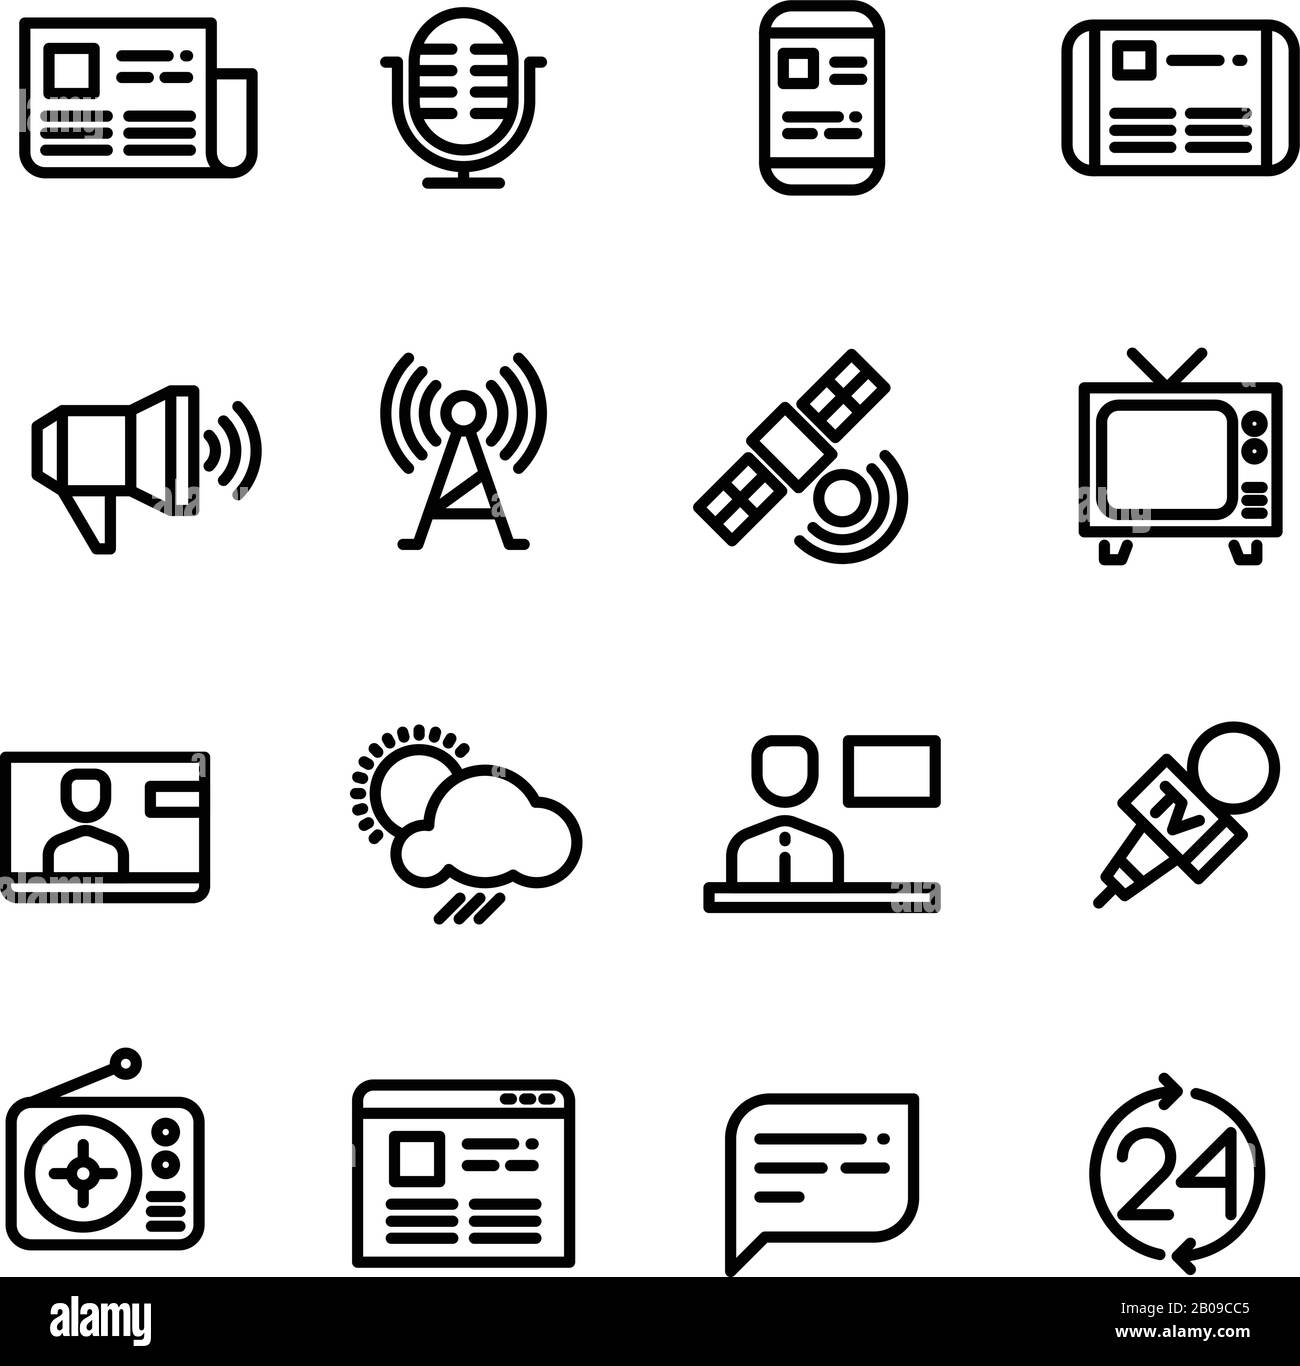 News, newspaper, speech technology, media vector icons. Television news and internet news illustration Stock Vector